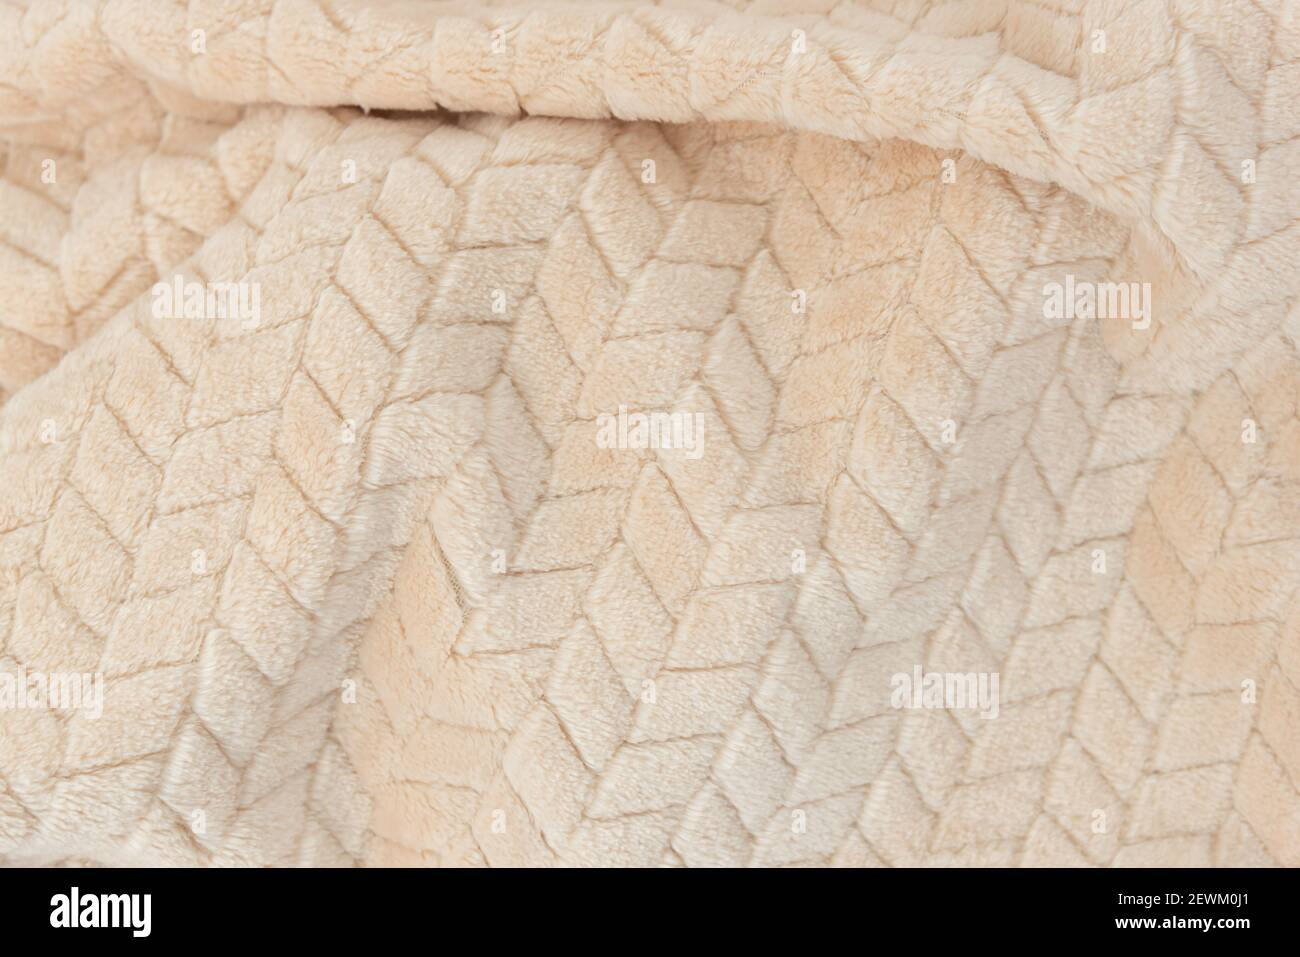 Plush beige blanket with fluffy pile and simple embossed pattern. Stock Photo